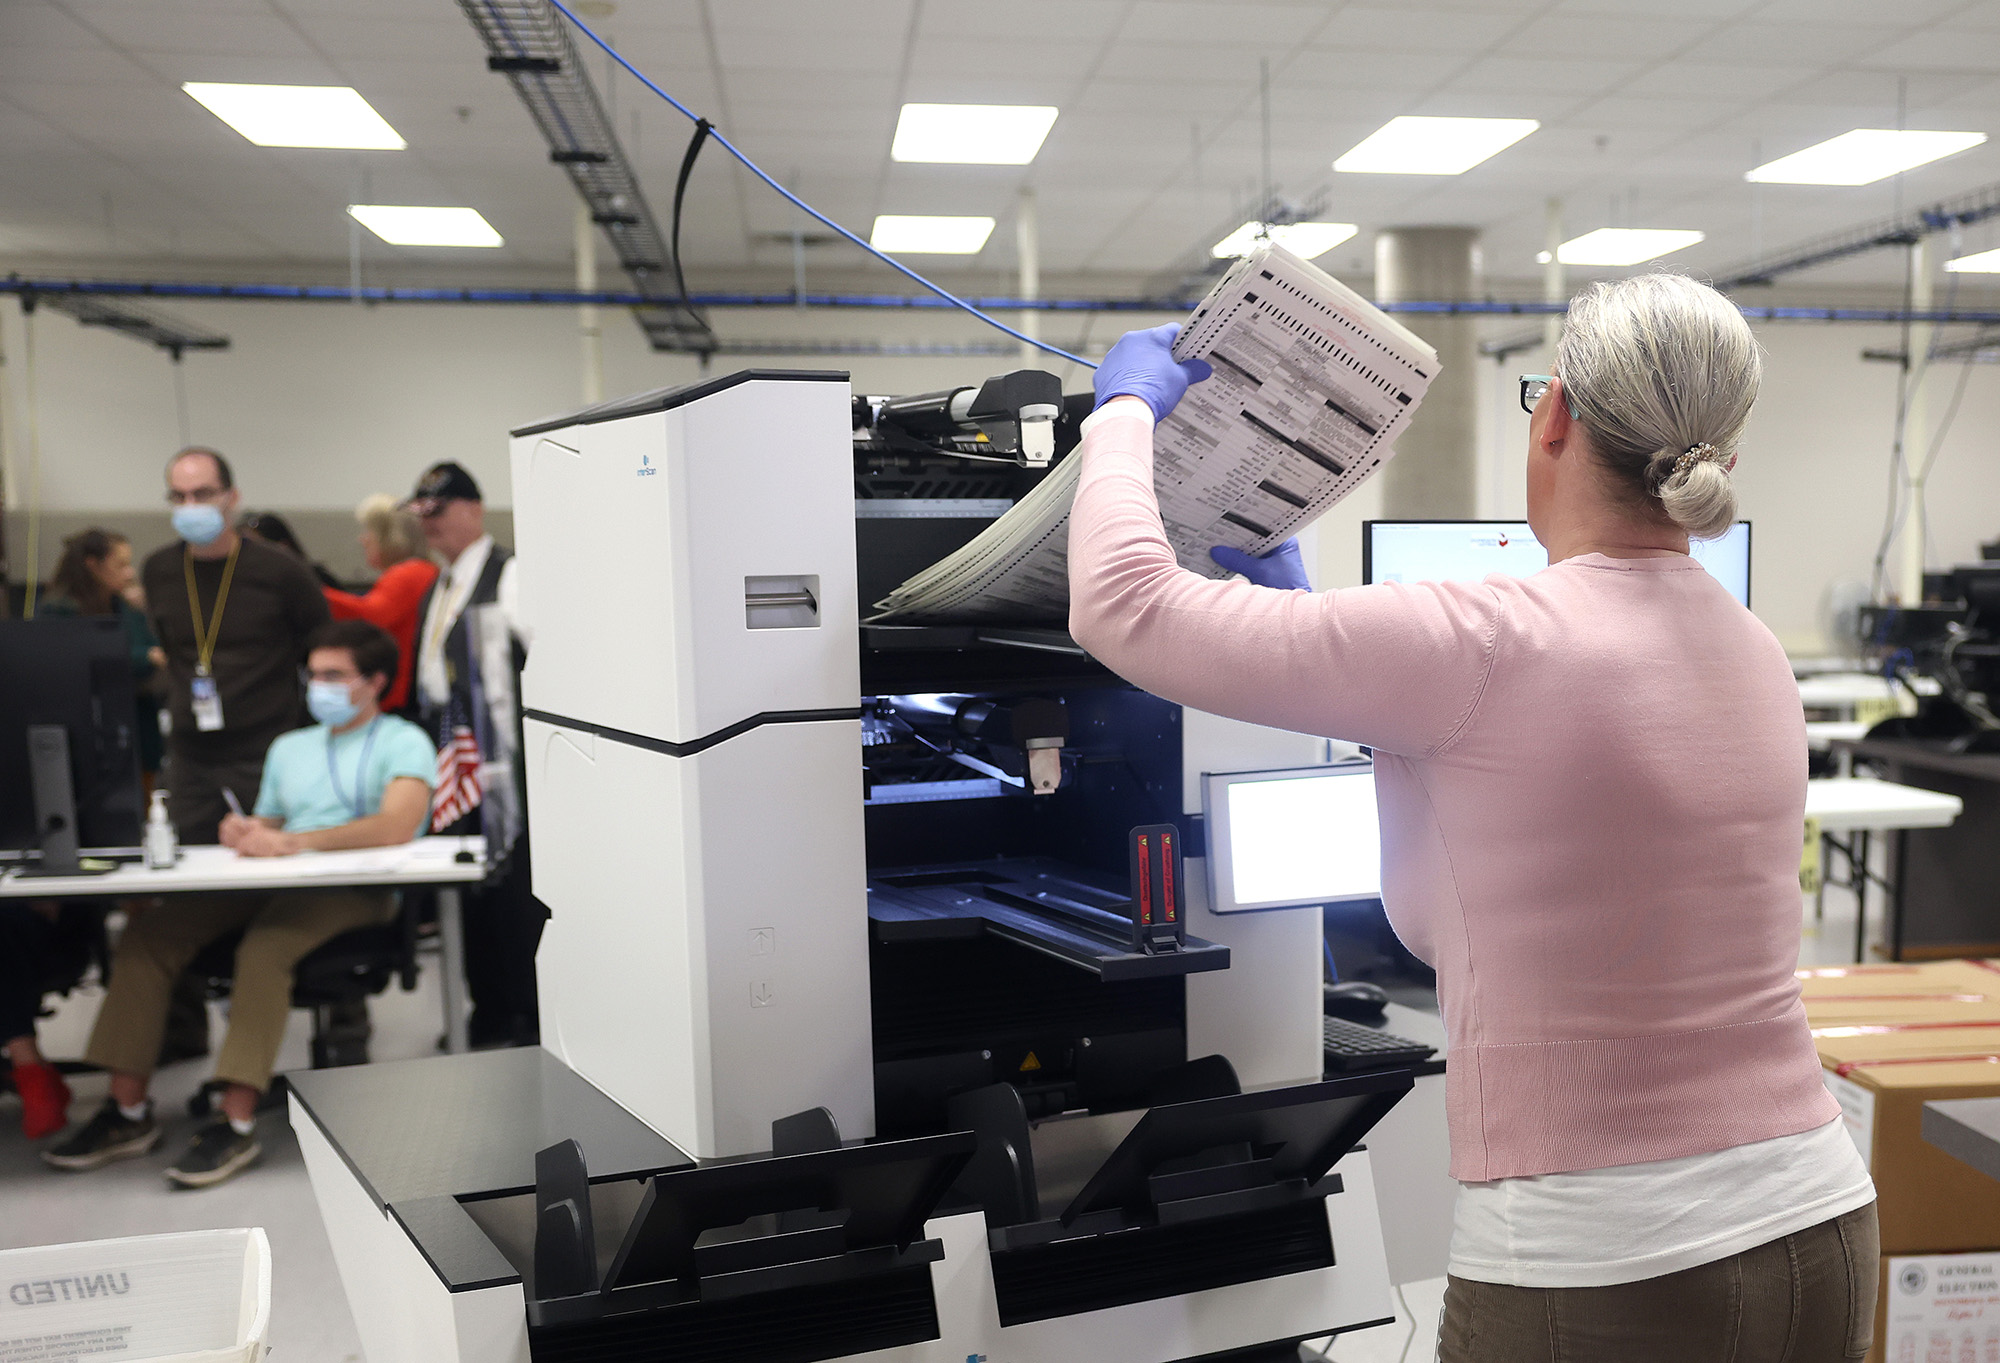 An election worker inserts ballots into a scanning machine at the Maricopa County Tabulation and Election Center in Phoenix on November 10.